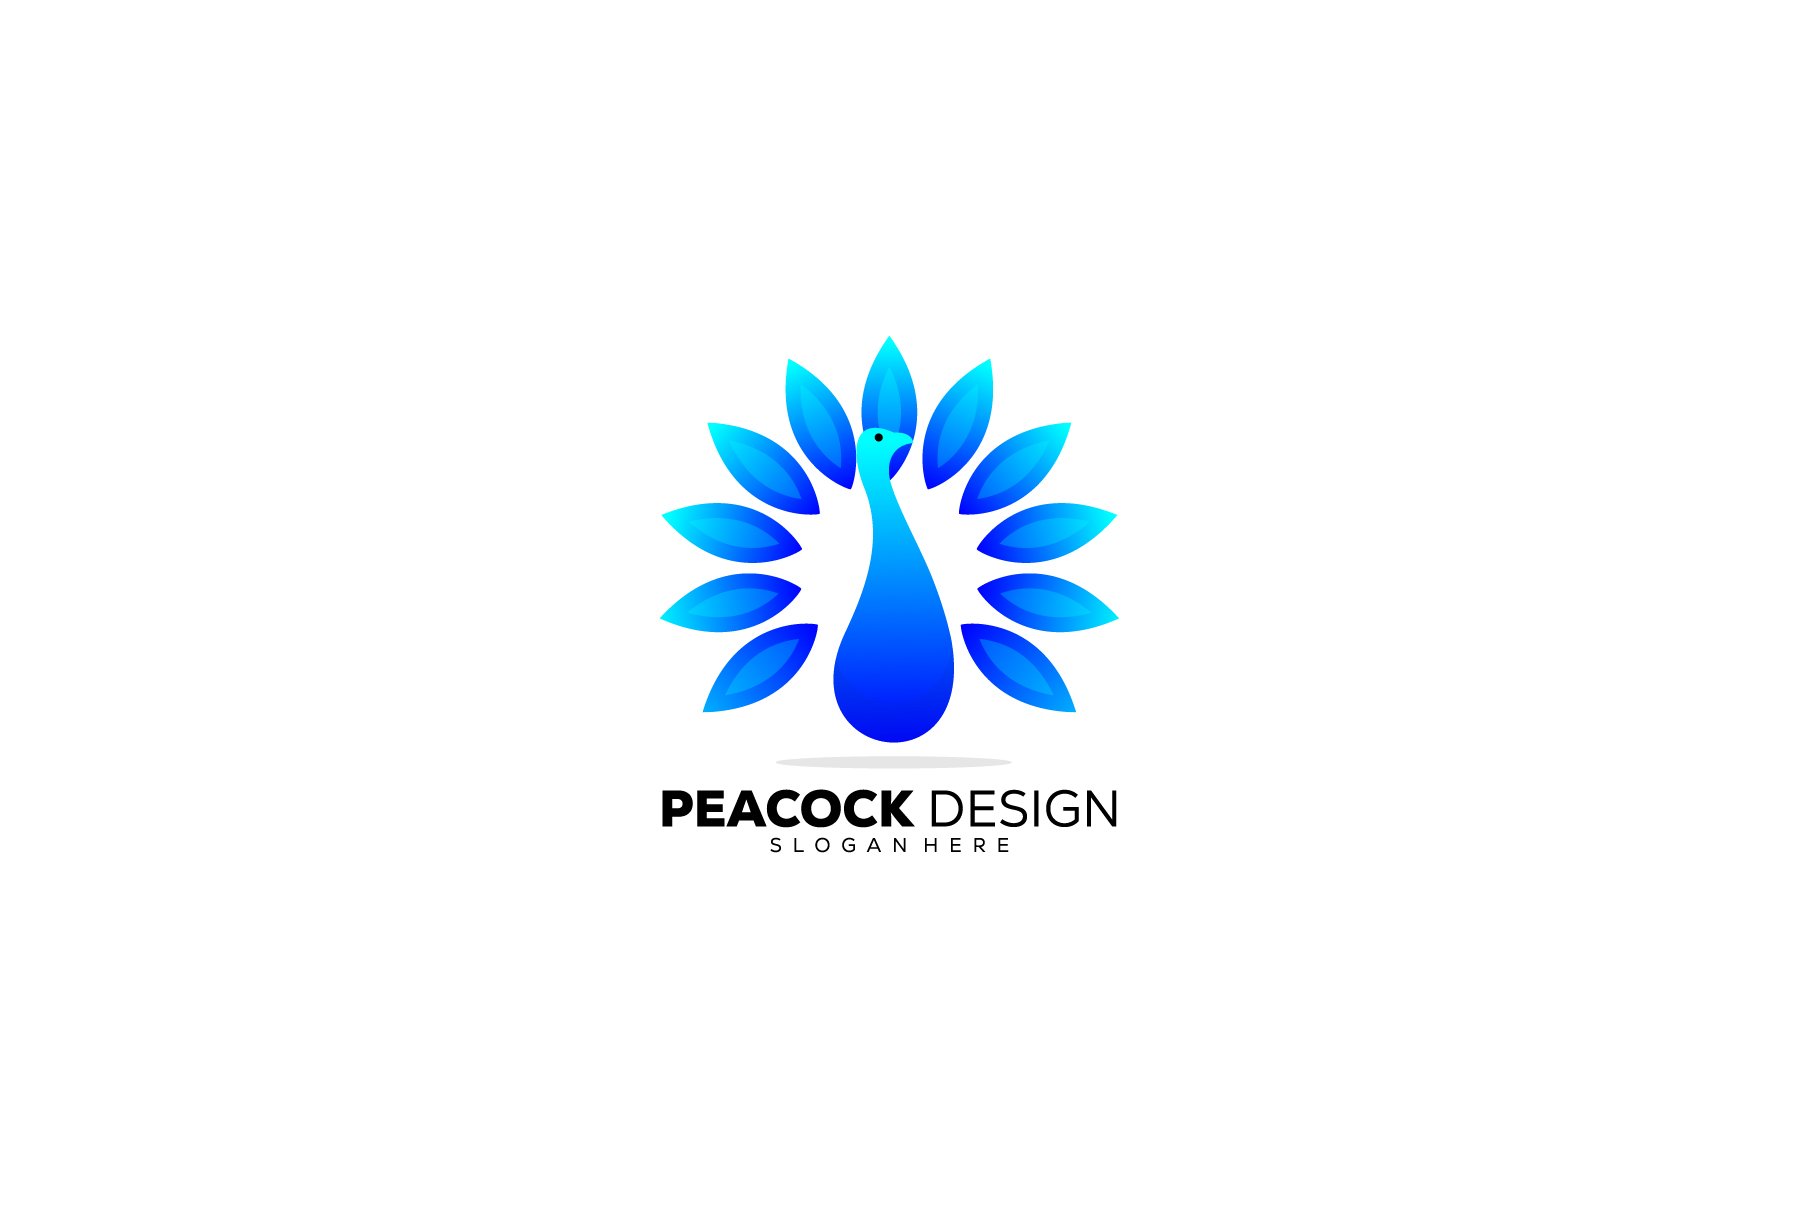 Pecock designs, themes, templates and downloadable graphic